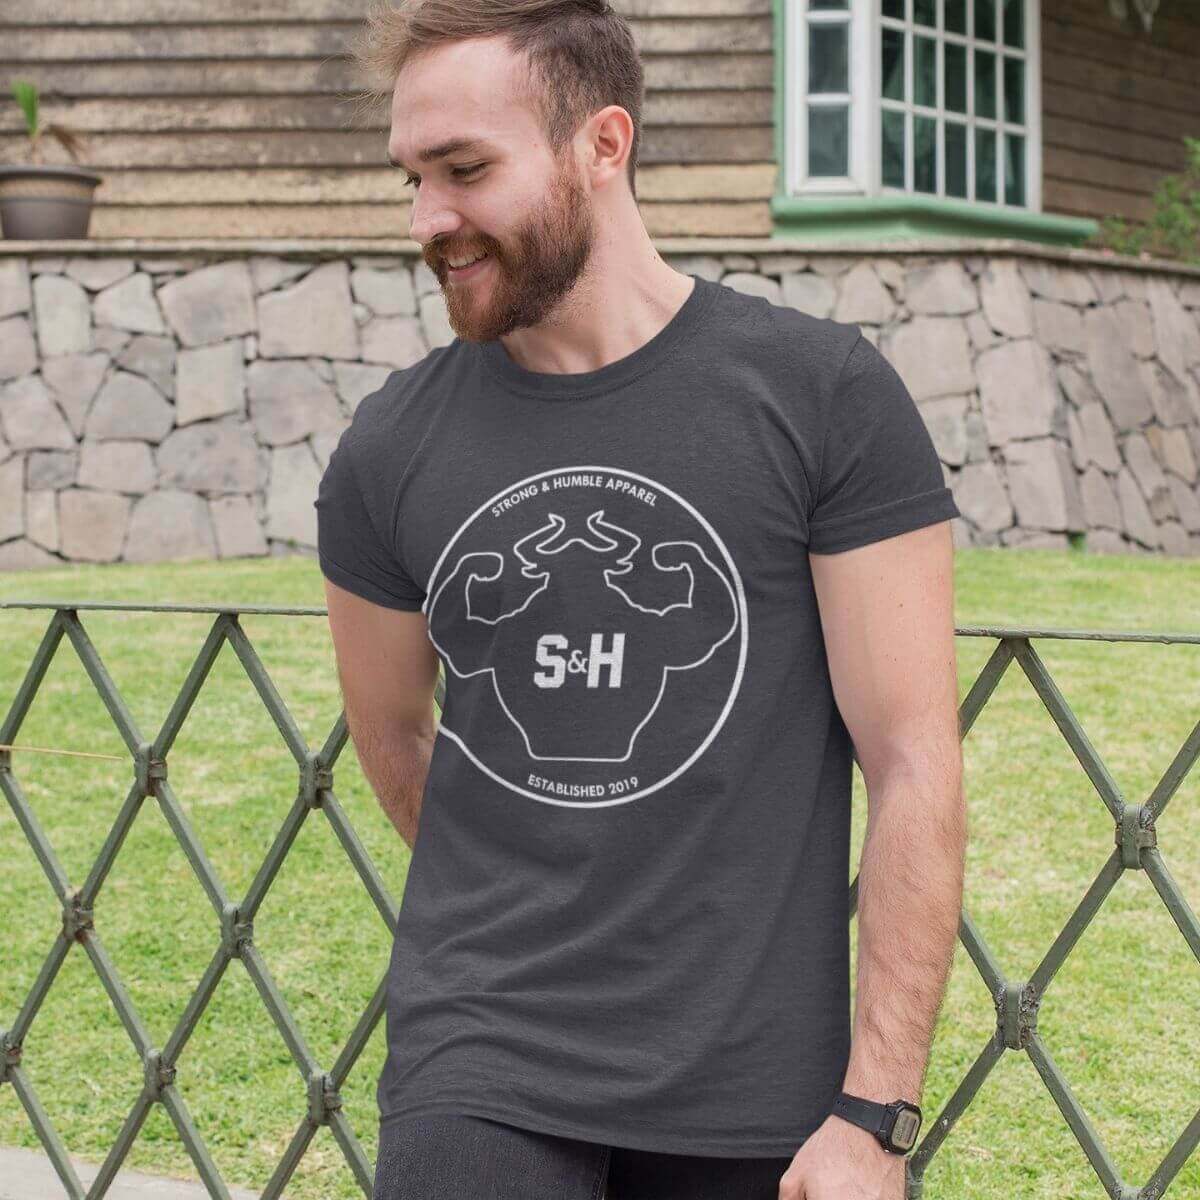 The Outline Men's T-Shirt T-shirt - Strong and Humble Apparel